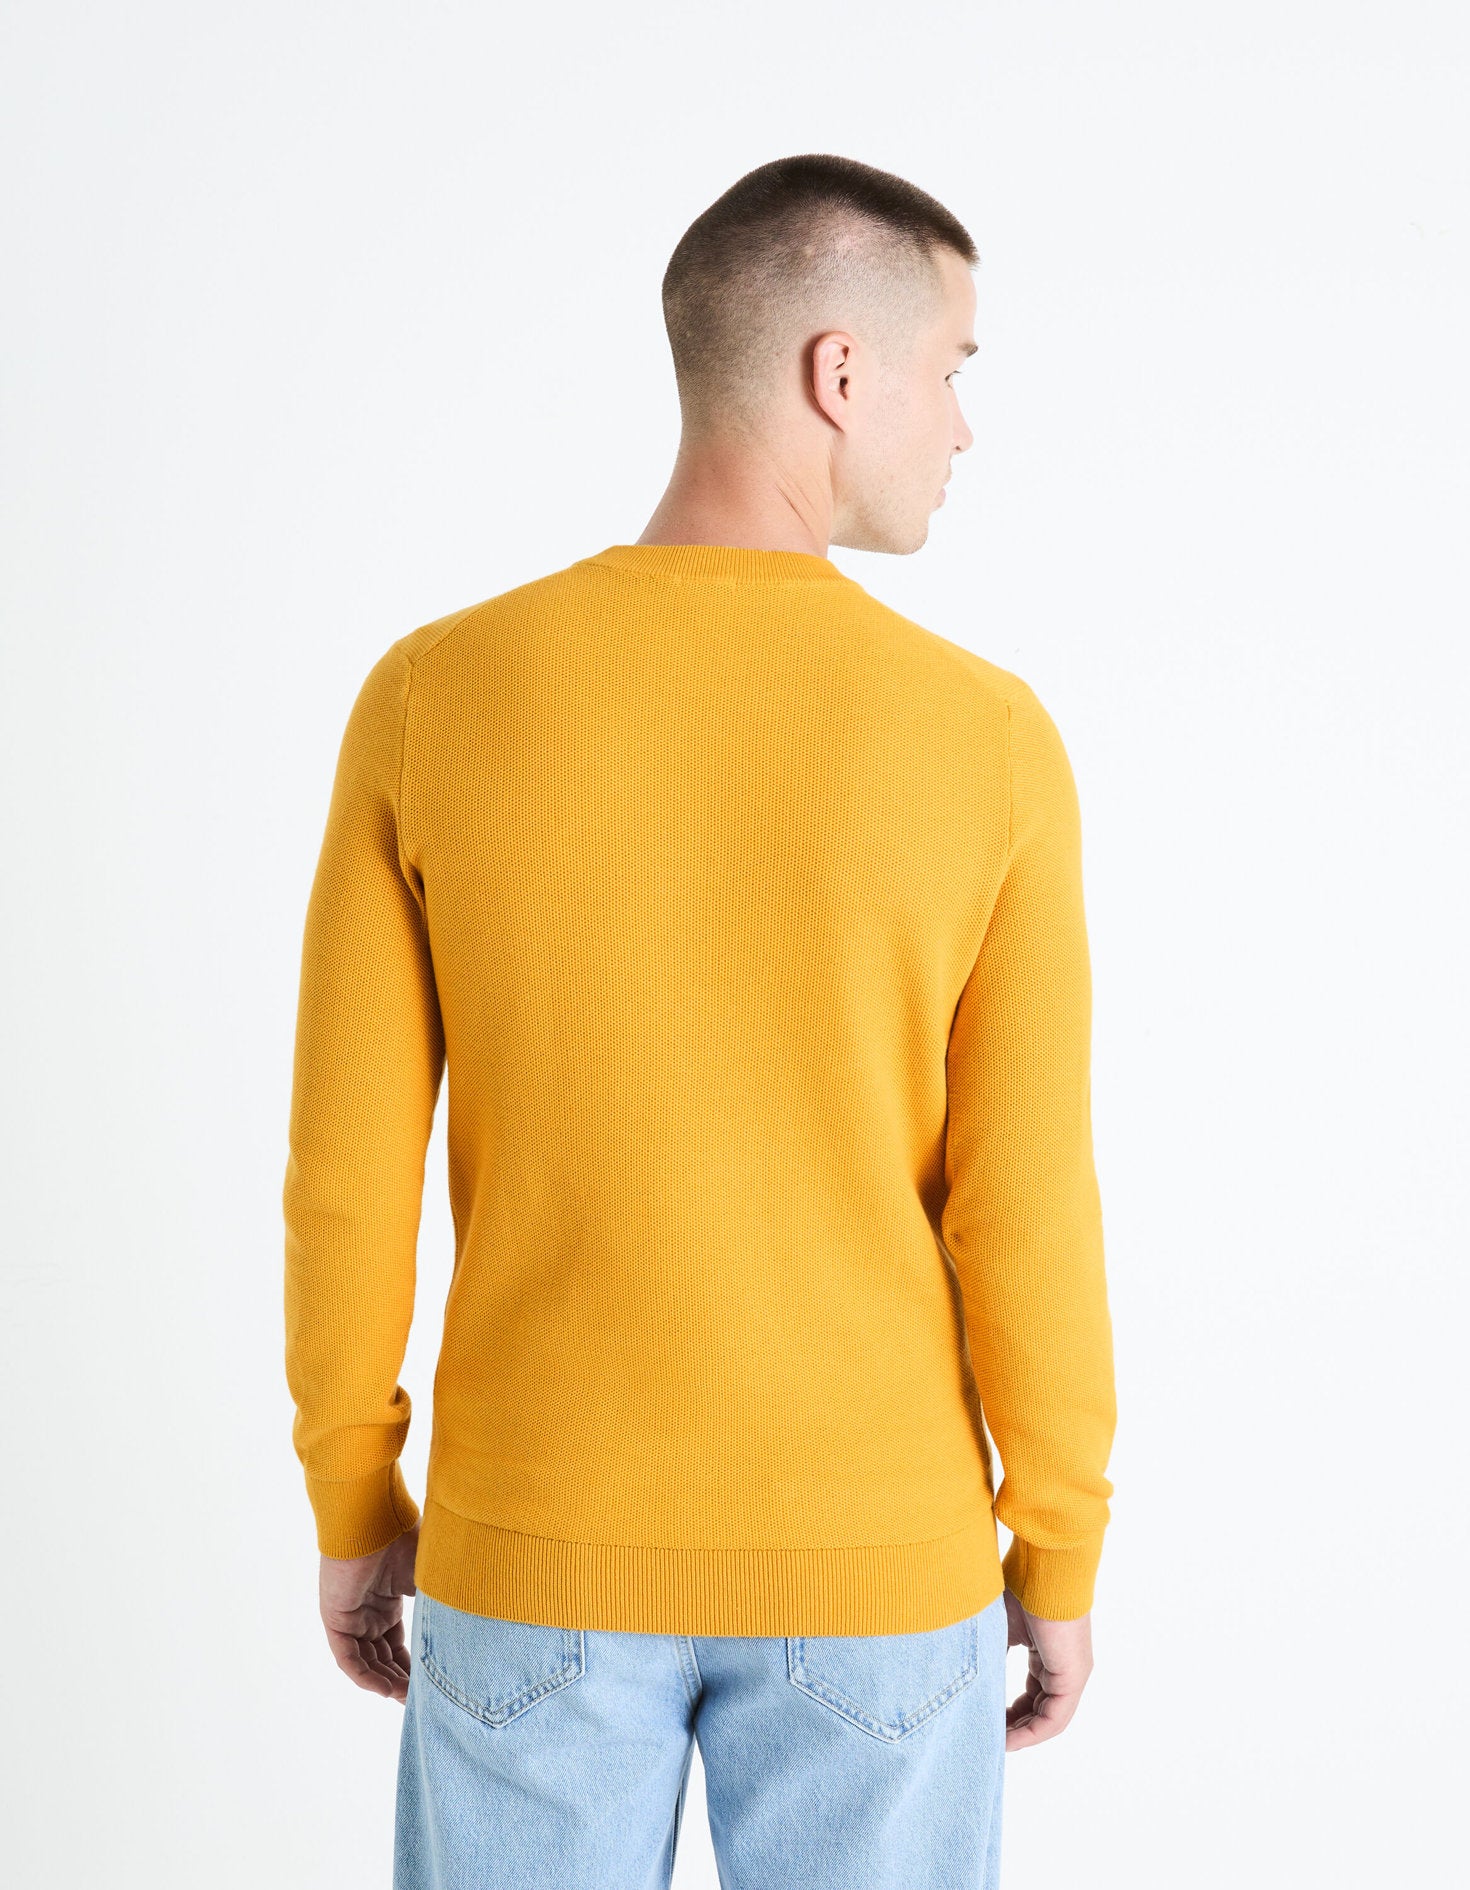 100% Cotton Round Neck Sweater - Yellow_BEPIC_JAUNE MOUTARDE_04